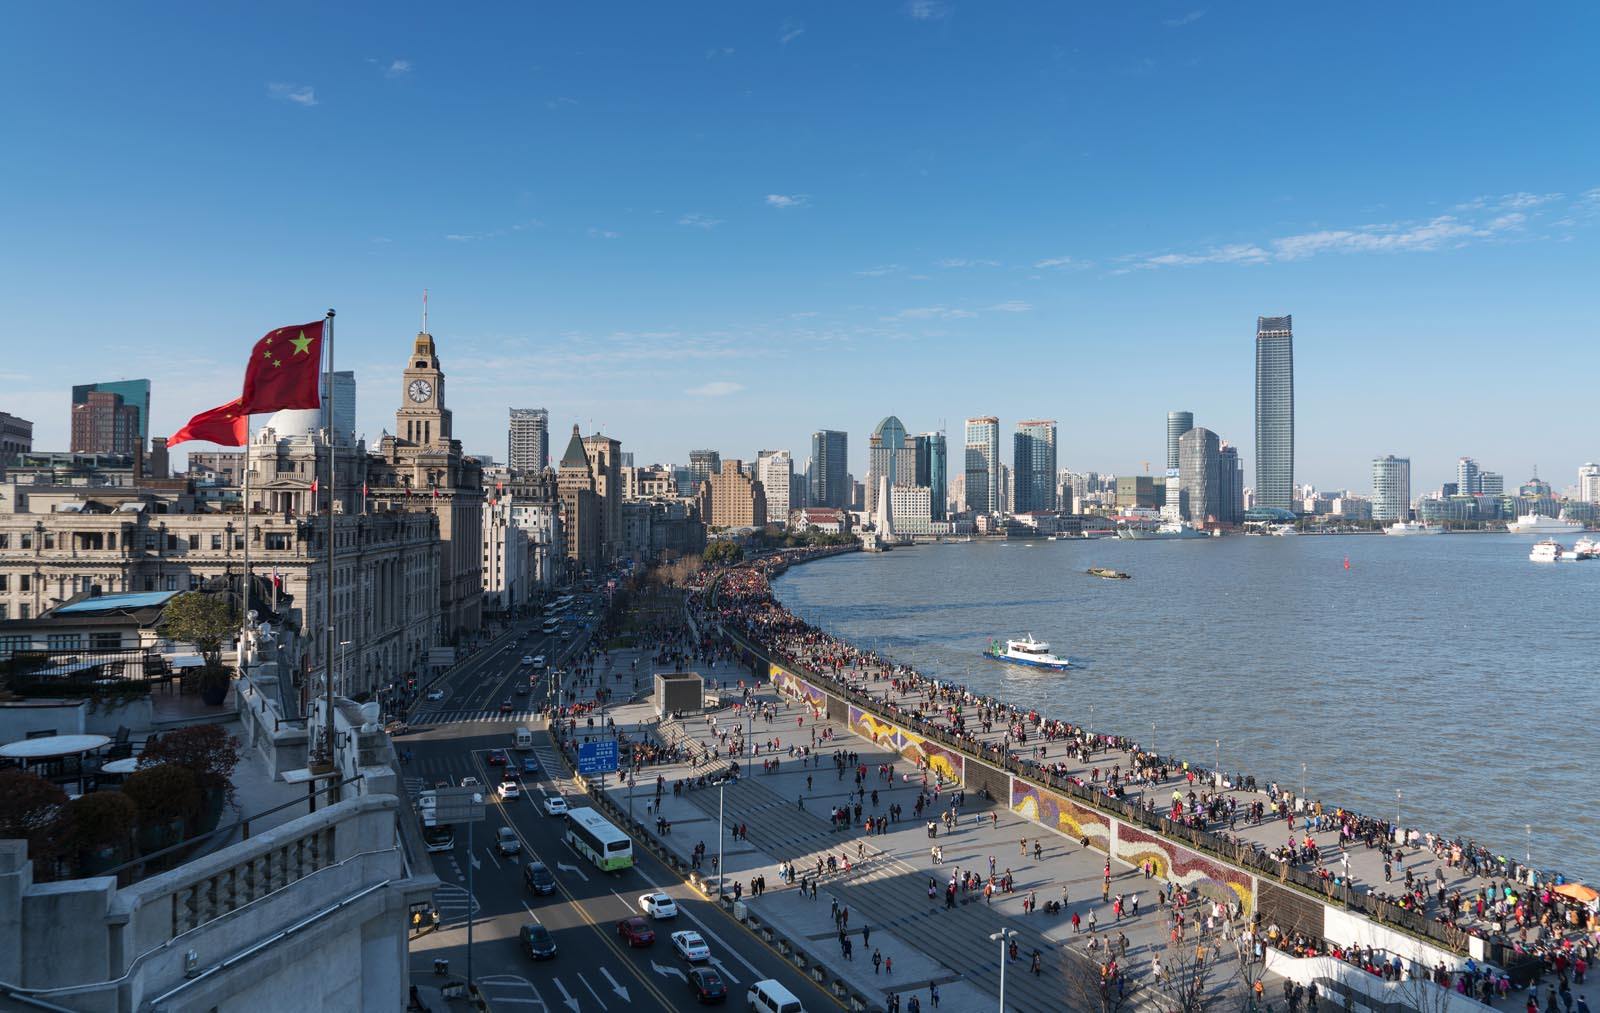 Aerial view of the Bund riverfront promenade with colonial architecture in Shanghai